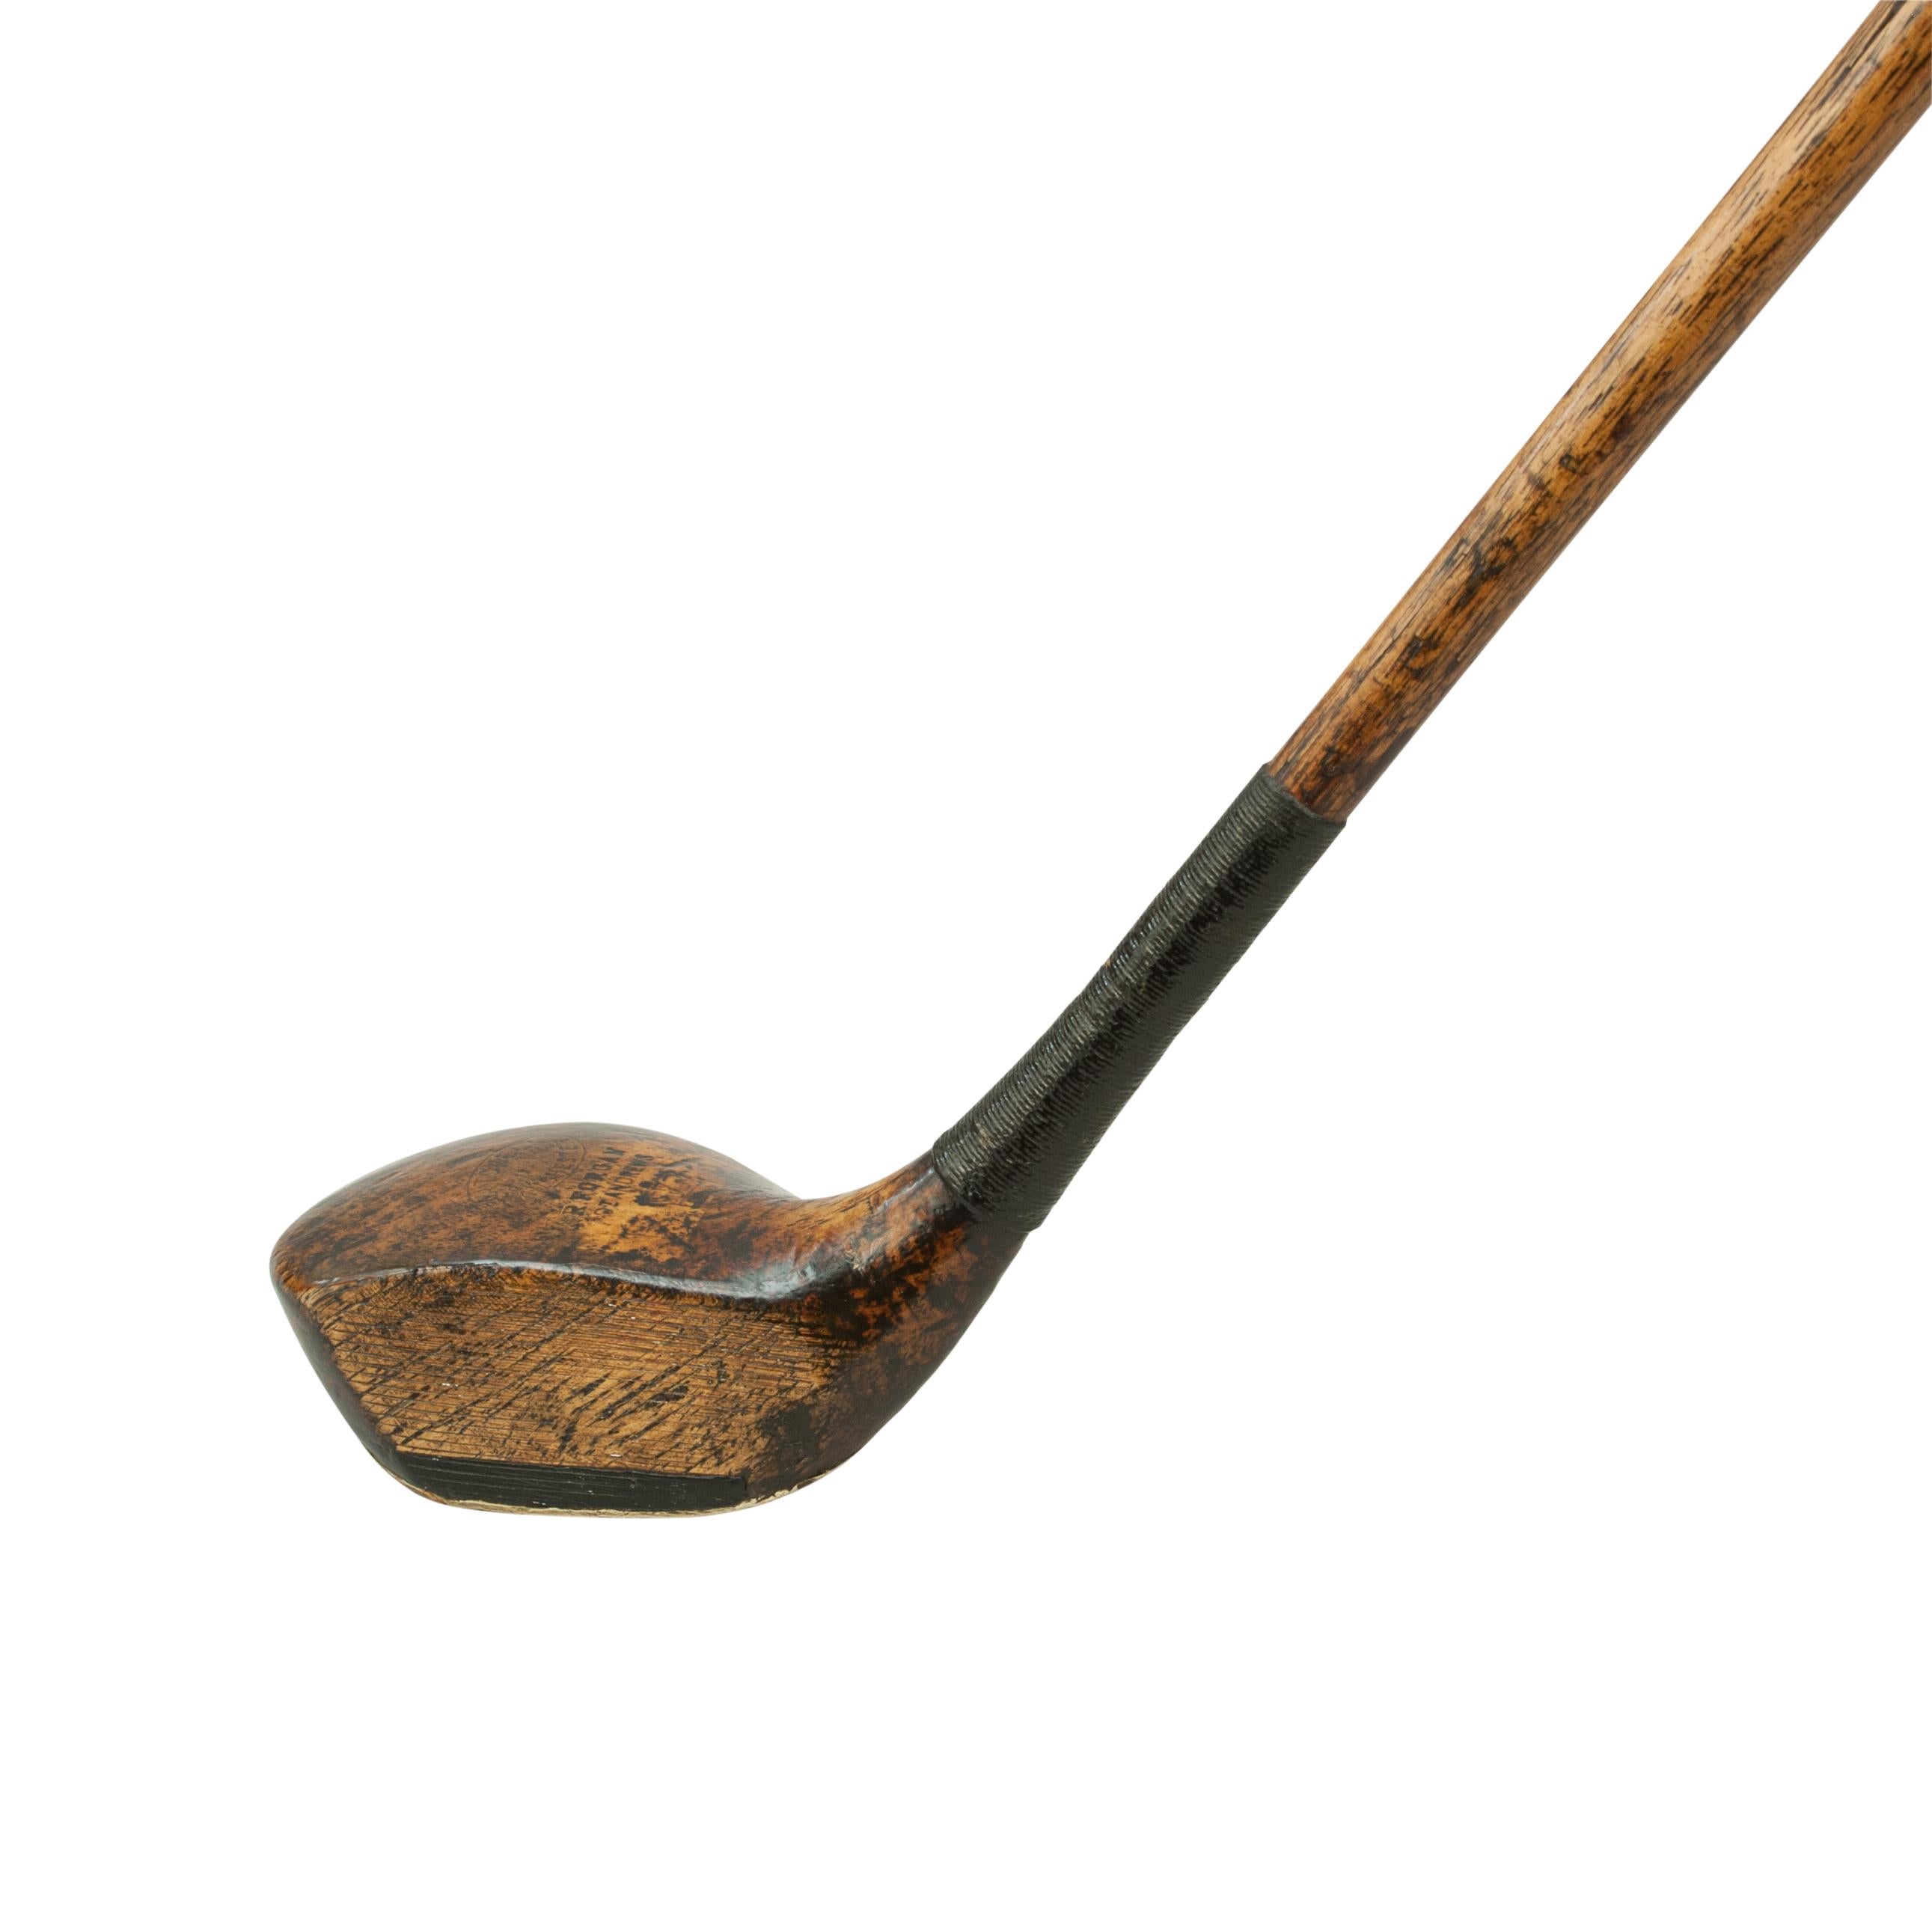 Vintage golf club, Hickory shafted Brassie, Forgan, St Andrews.
A good persimmon wood brassie by Robert Forgan & Son of St Andrews. The club has a hickory shaft with a replaced suede leather grip. The head is marked with Forgan's details with the